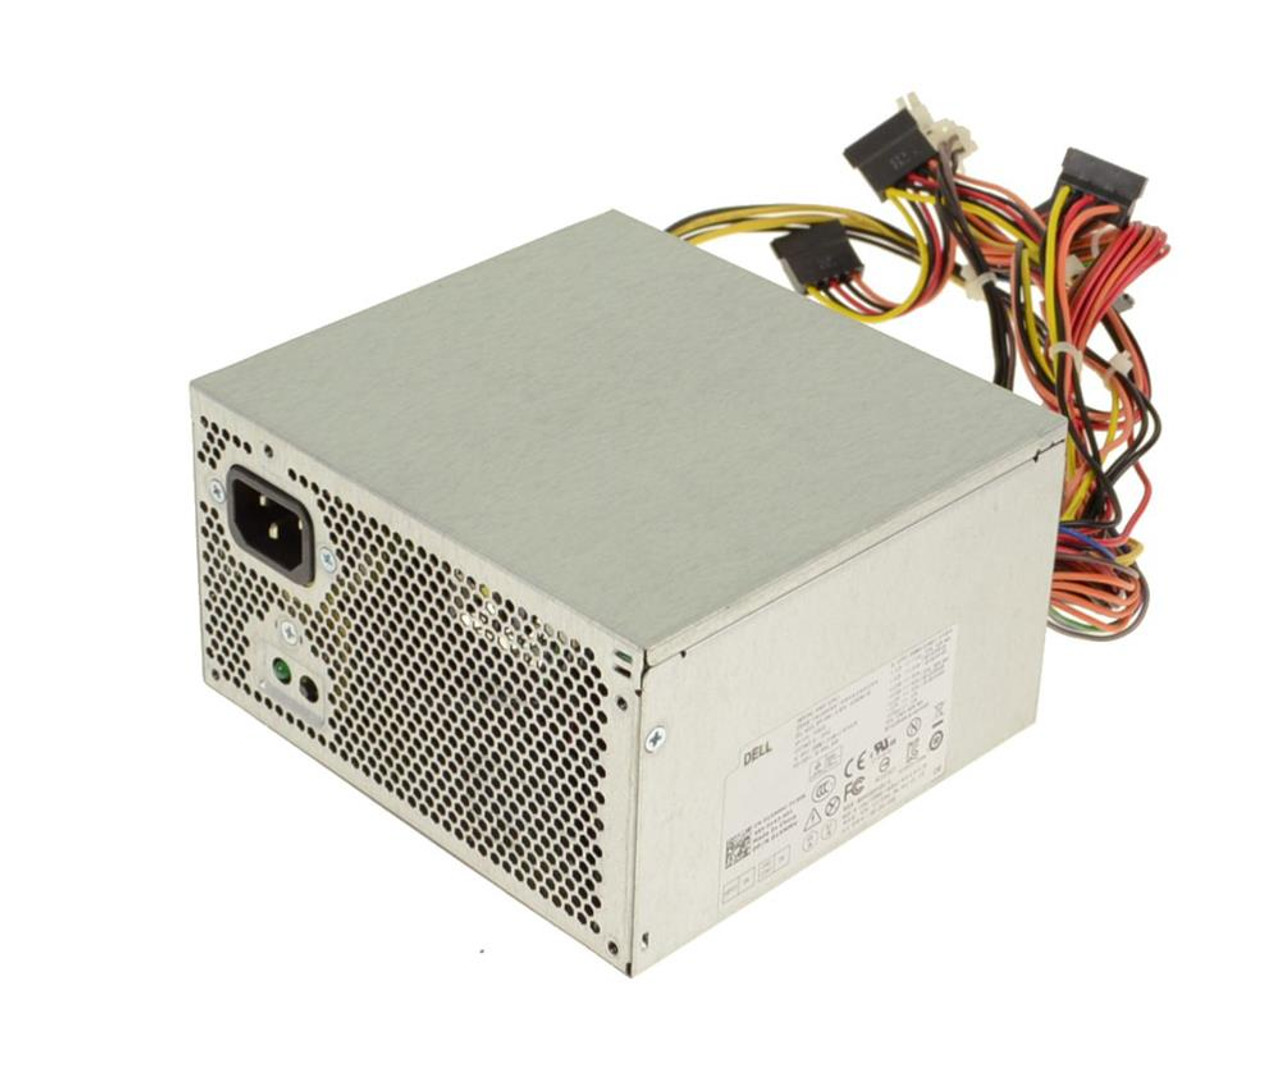 01XMMV Dell 460-Watts Power Supply for XPS 8700